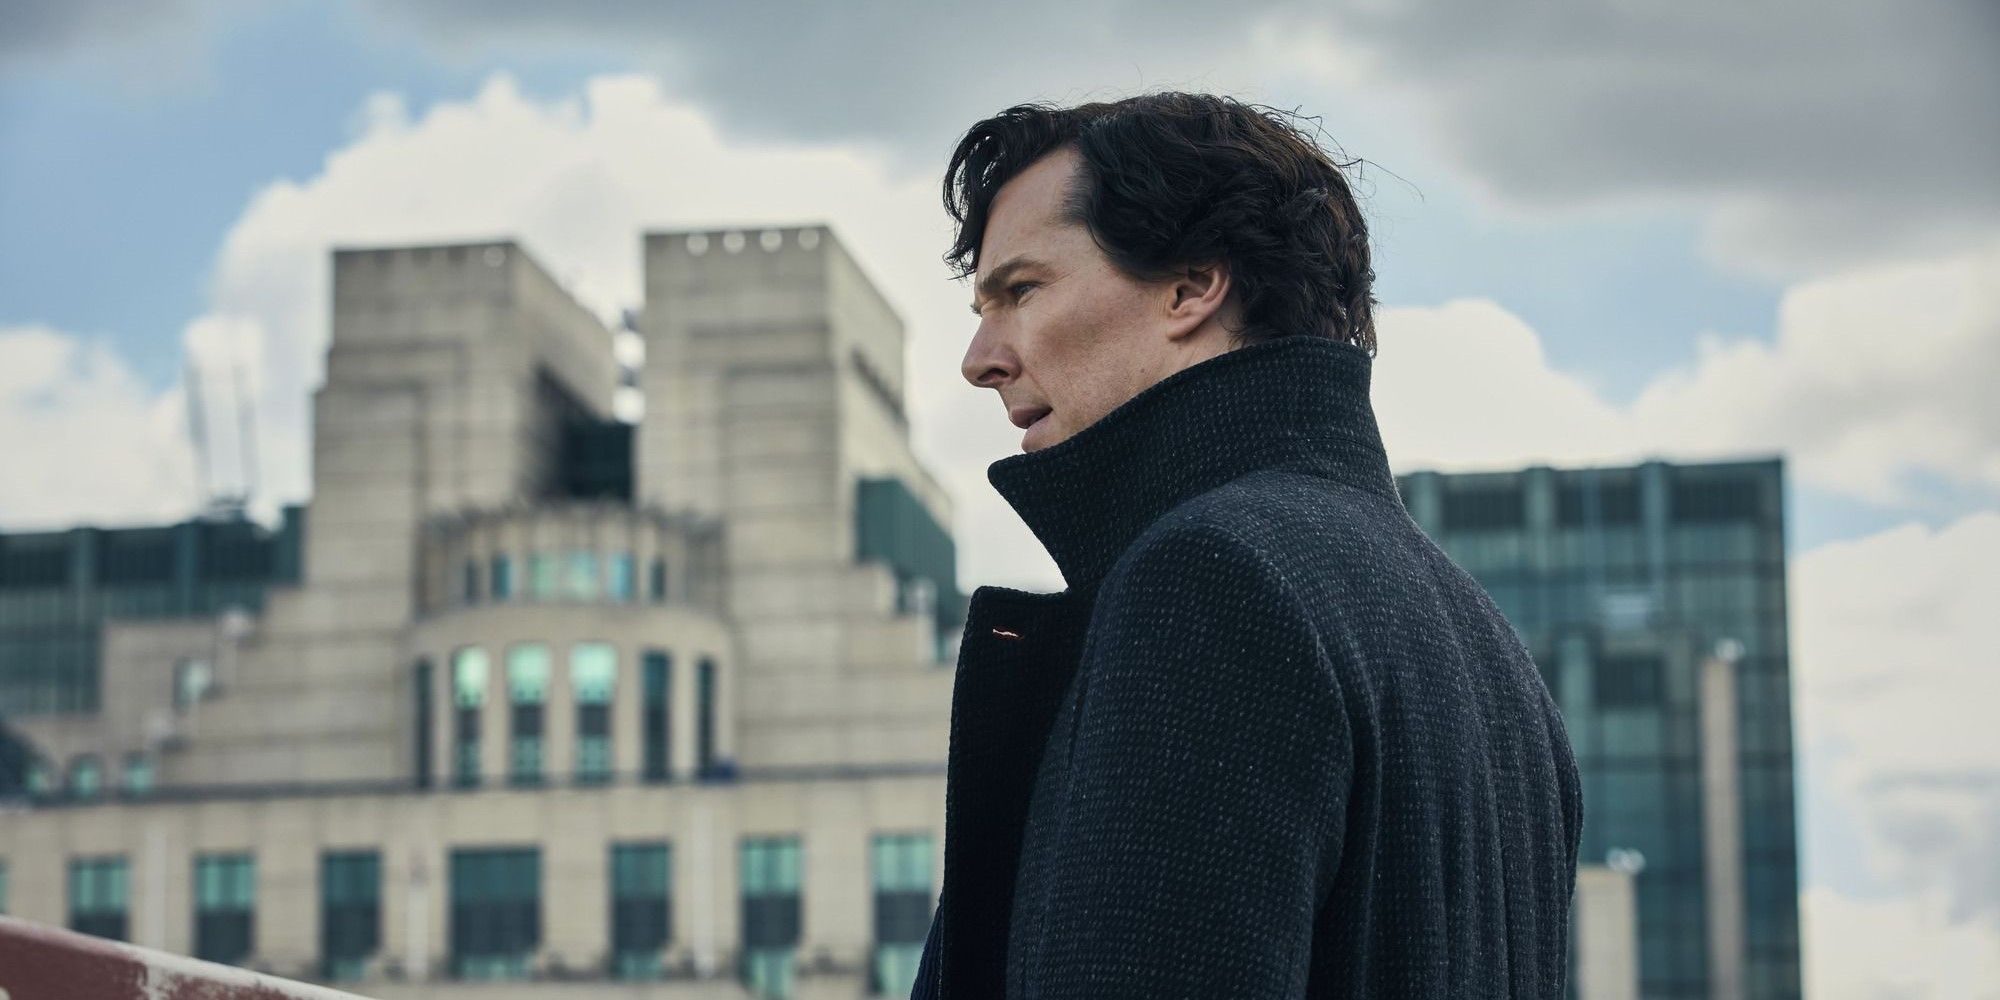 Sherlock standing on the edge of a building in BBC's Sherlock